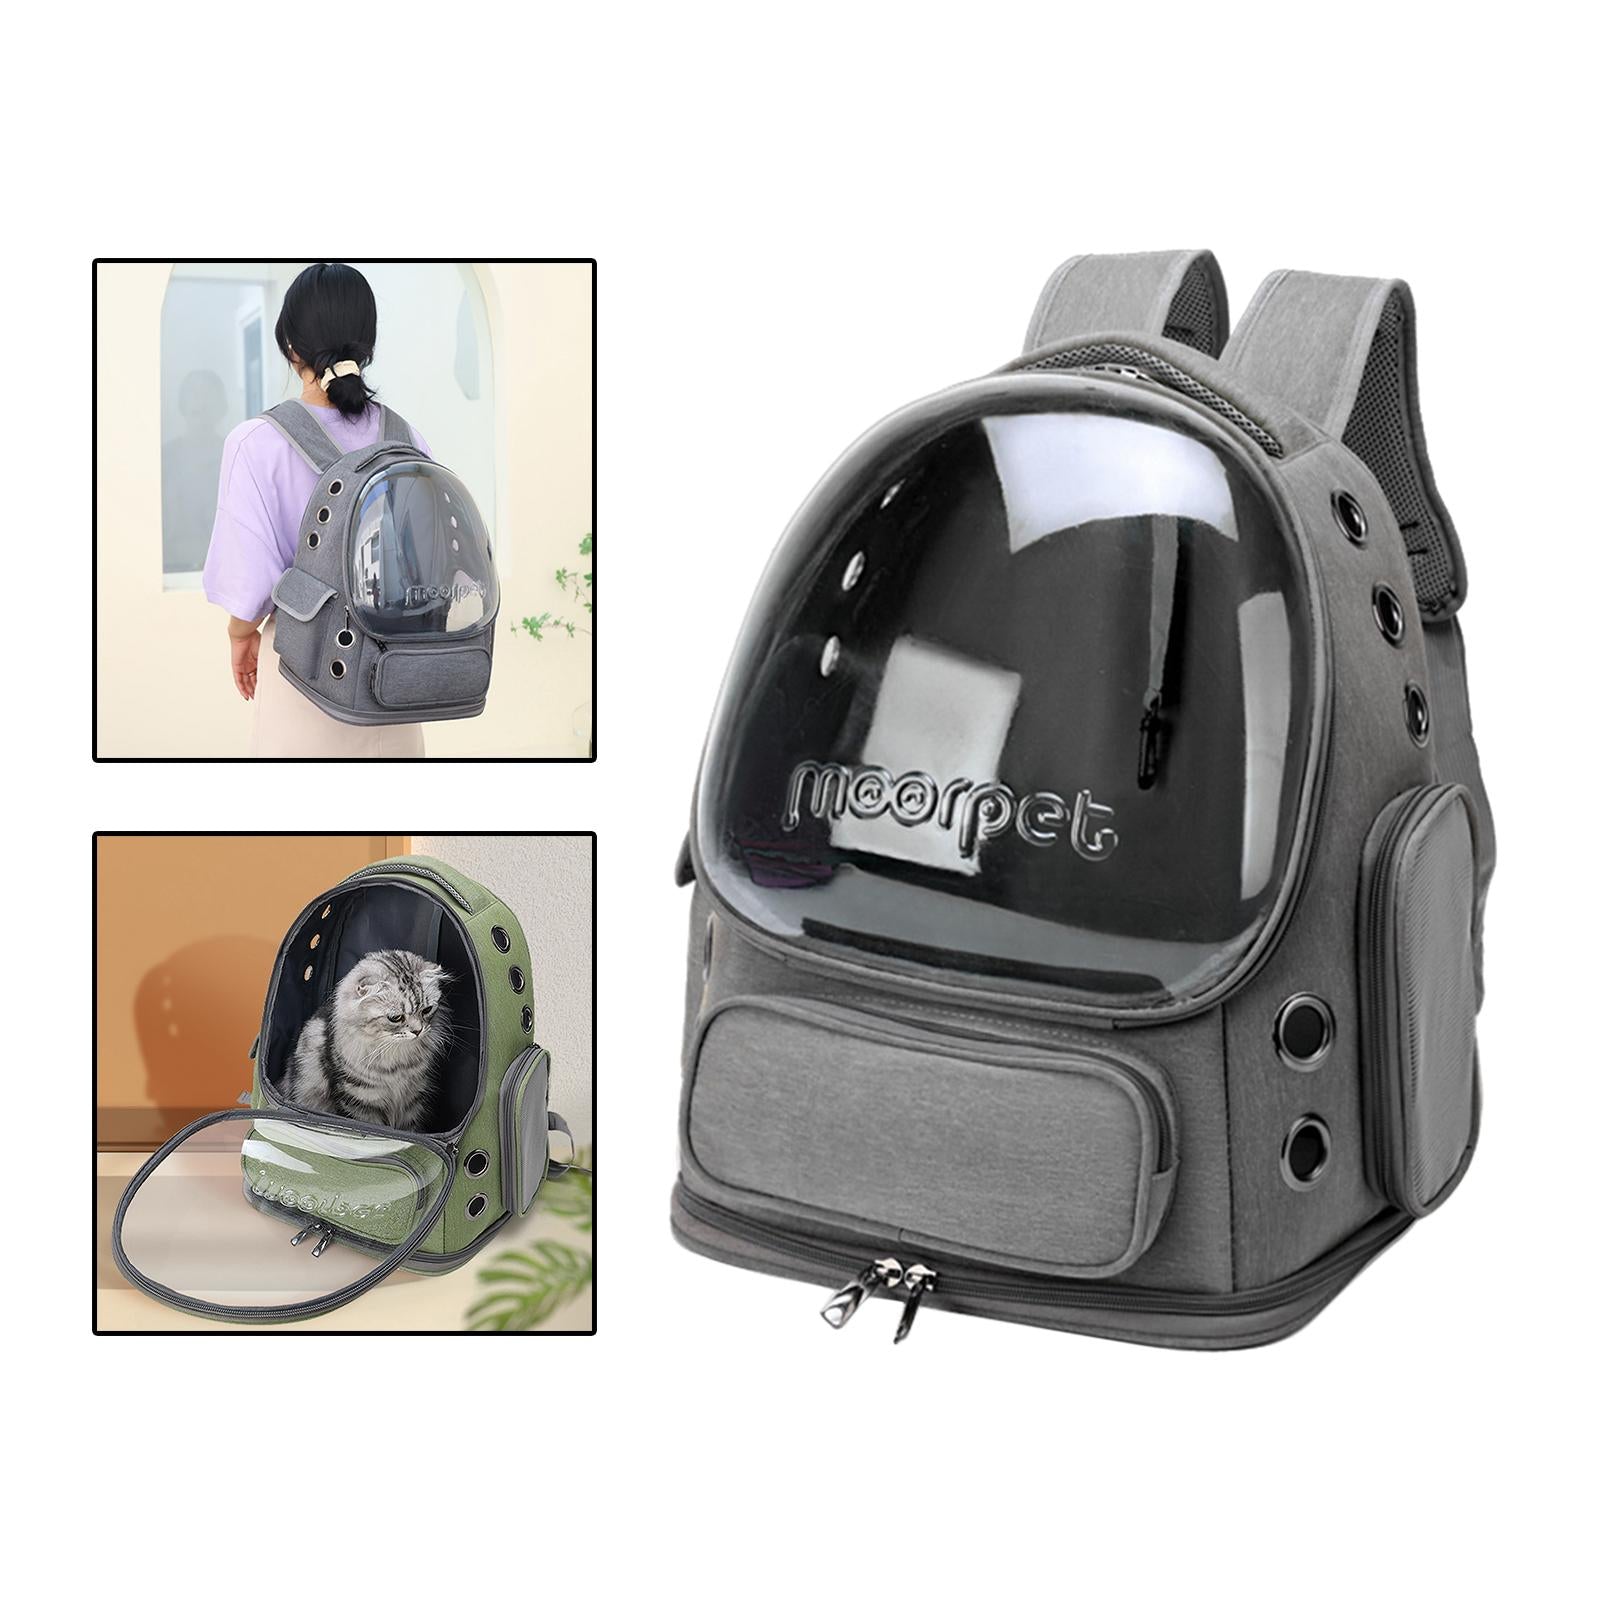 Cat Carrier Backpack Airline Cat and Small Dog Large Ventilated Portable Carrying Bag Pet Backpack for Travel Outdoor Hiking Use Grey